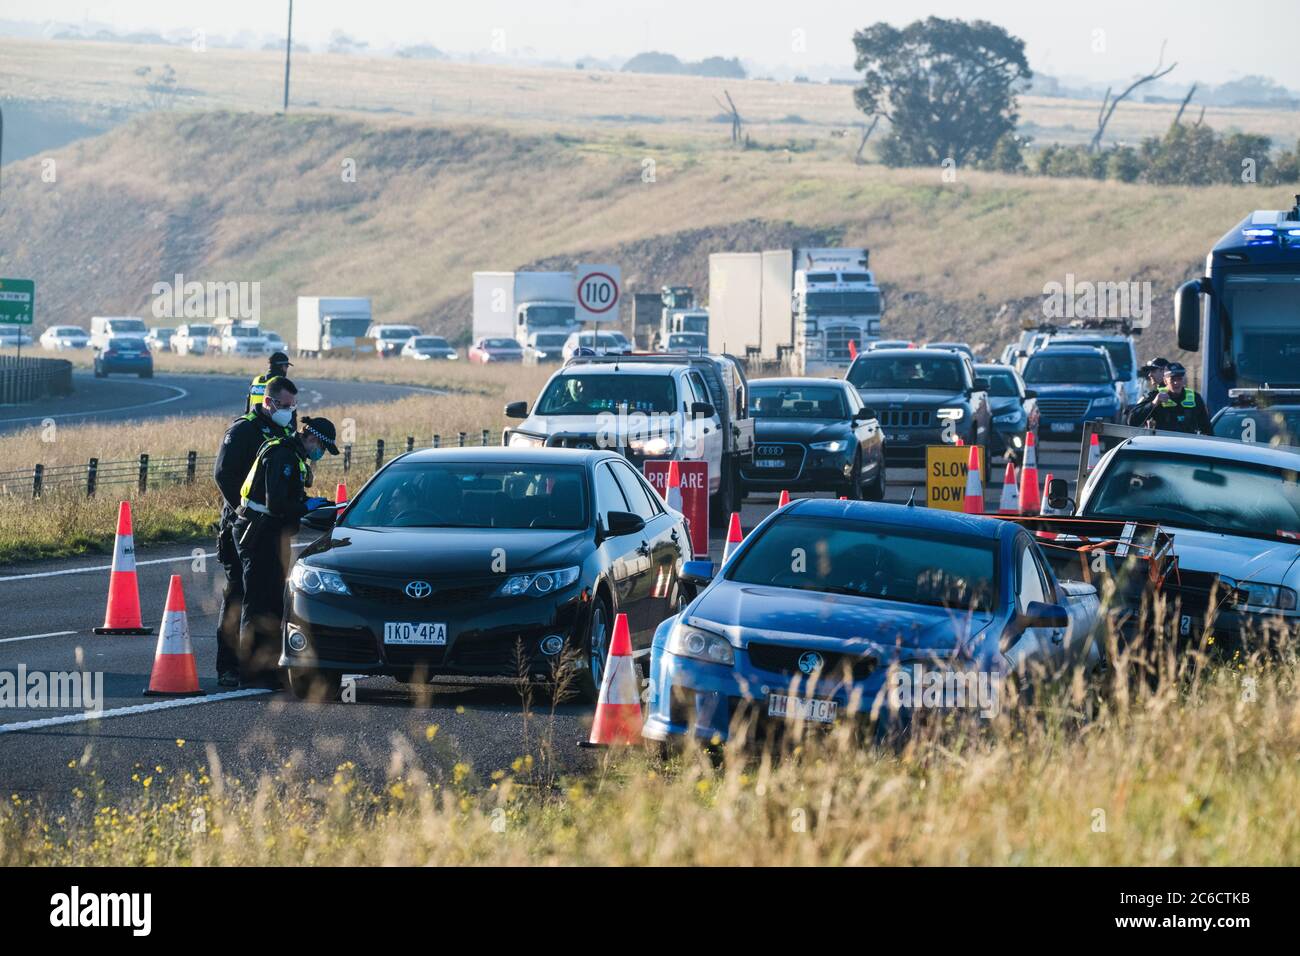 Melbourne, Australia 9 July 2020. Victoria Police road blocks are now checking cars leaving the city along highways. A checkpoint on the Western Highway between Melton and Bacchus Marsh was in operation this morning checking cars travelling towards Ballarat. Credit: Michael Currie/Alamy Live News Stock Photo